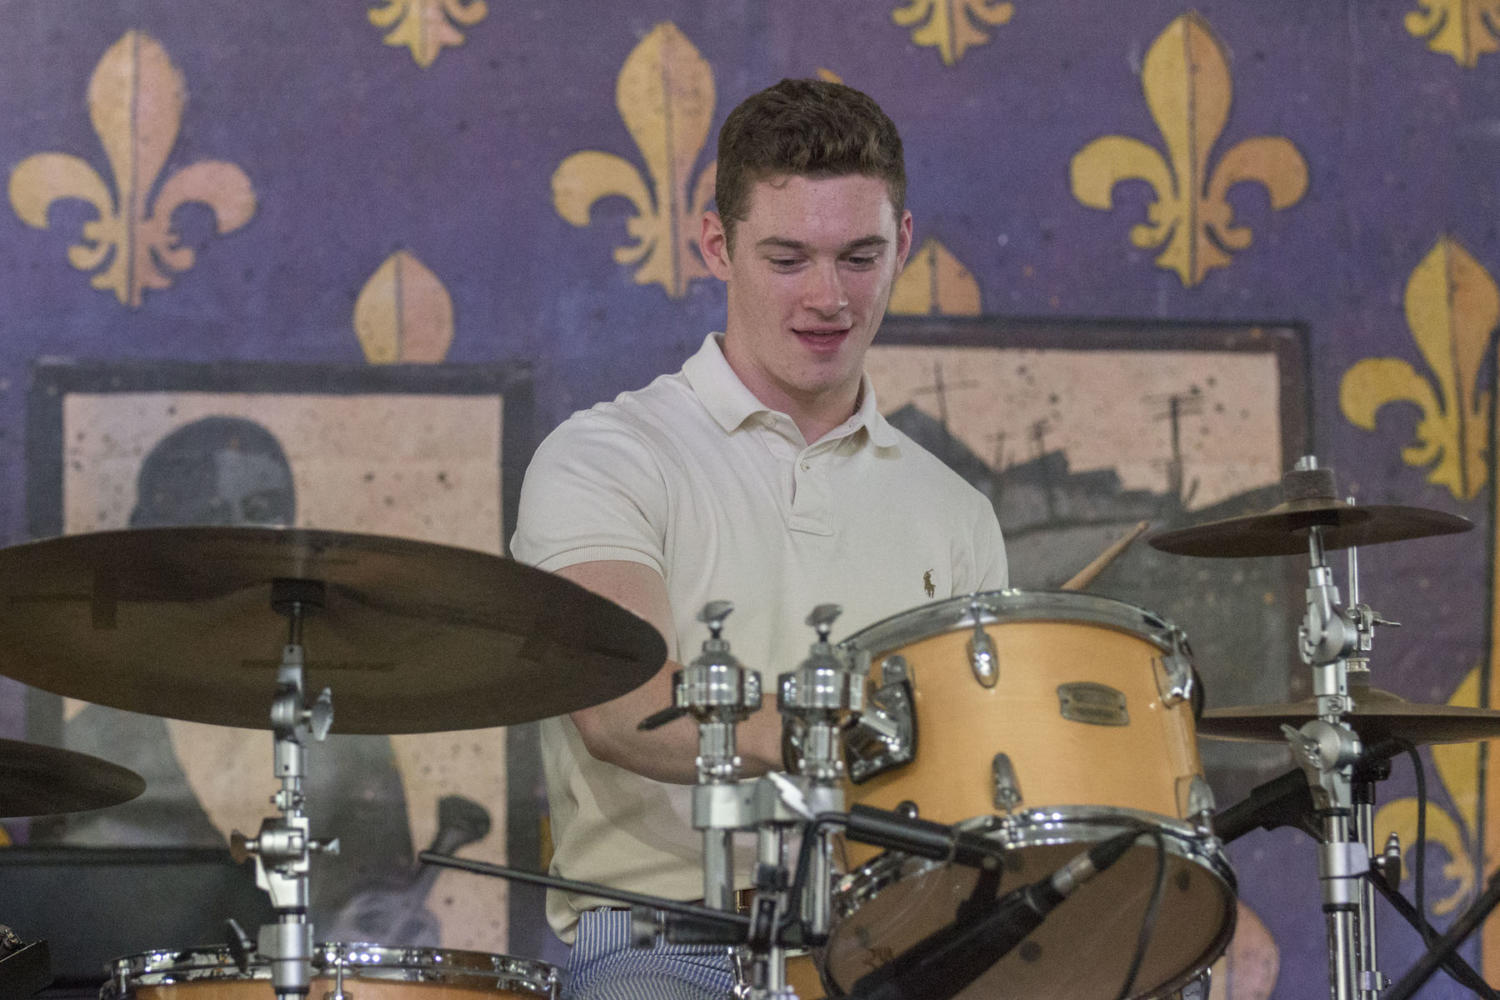 Patrick Kelleher, a music industries senior, plays drums with Don Vappie at the Economy Hall tent during the New Orleans Jazz and Heritage Festival. Skies were clear and weather was mild for the first weekend of the festival.